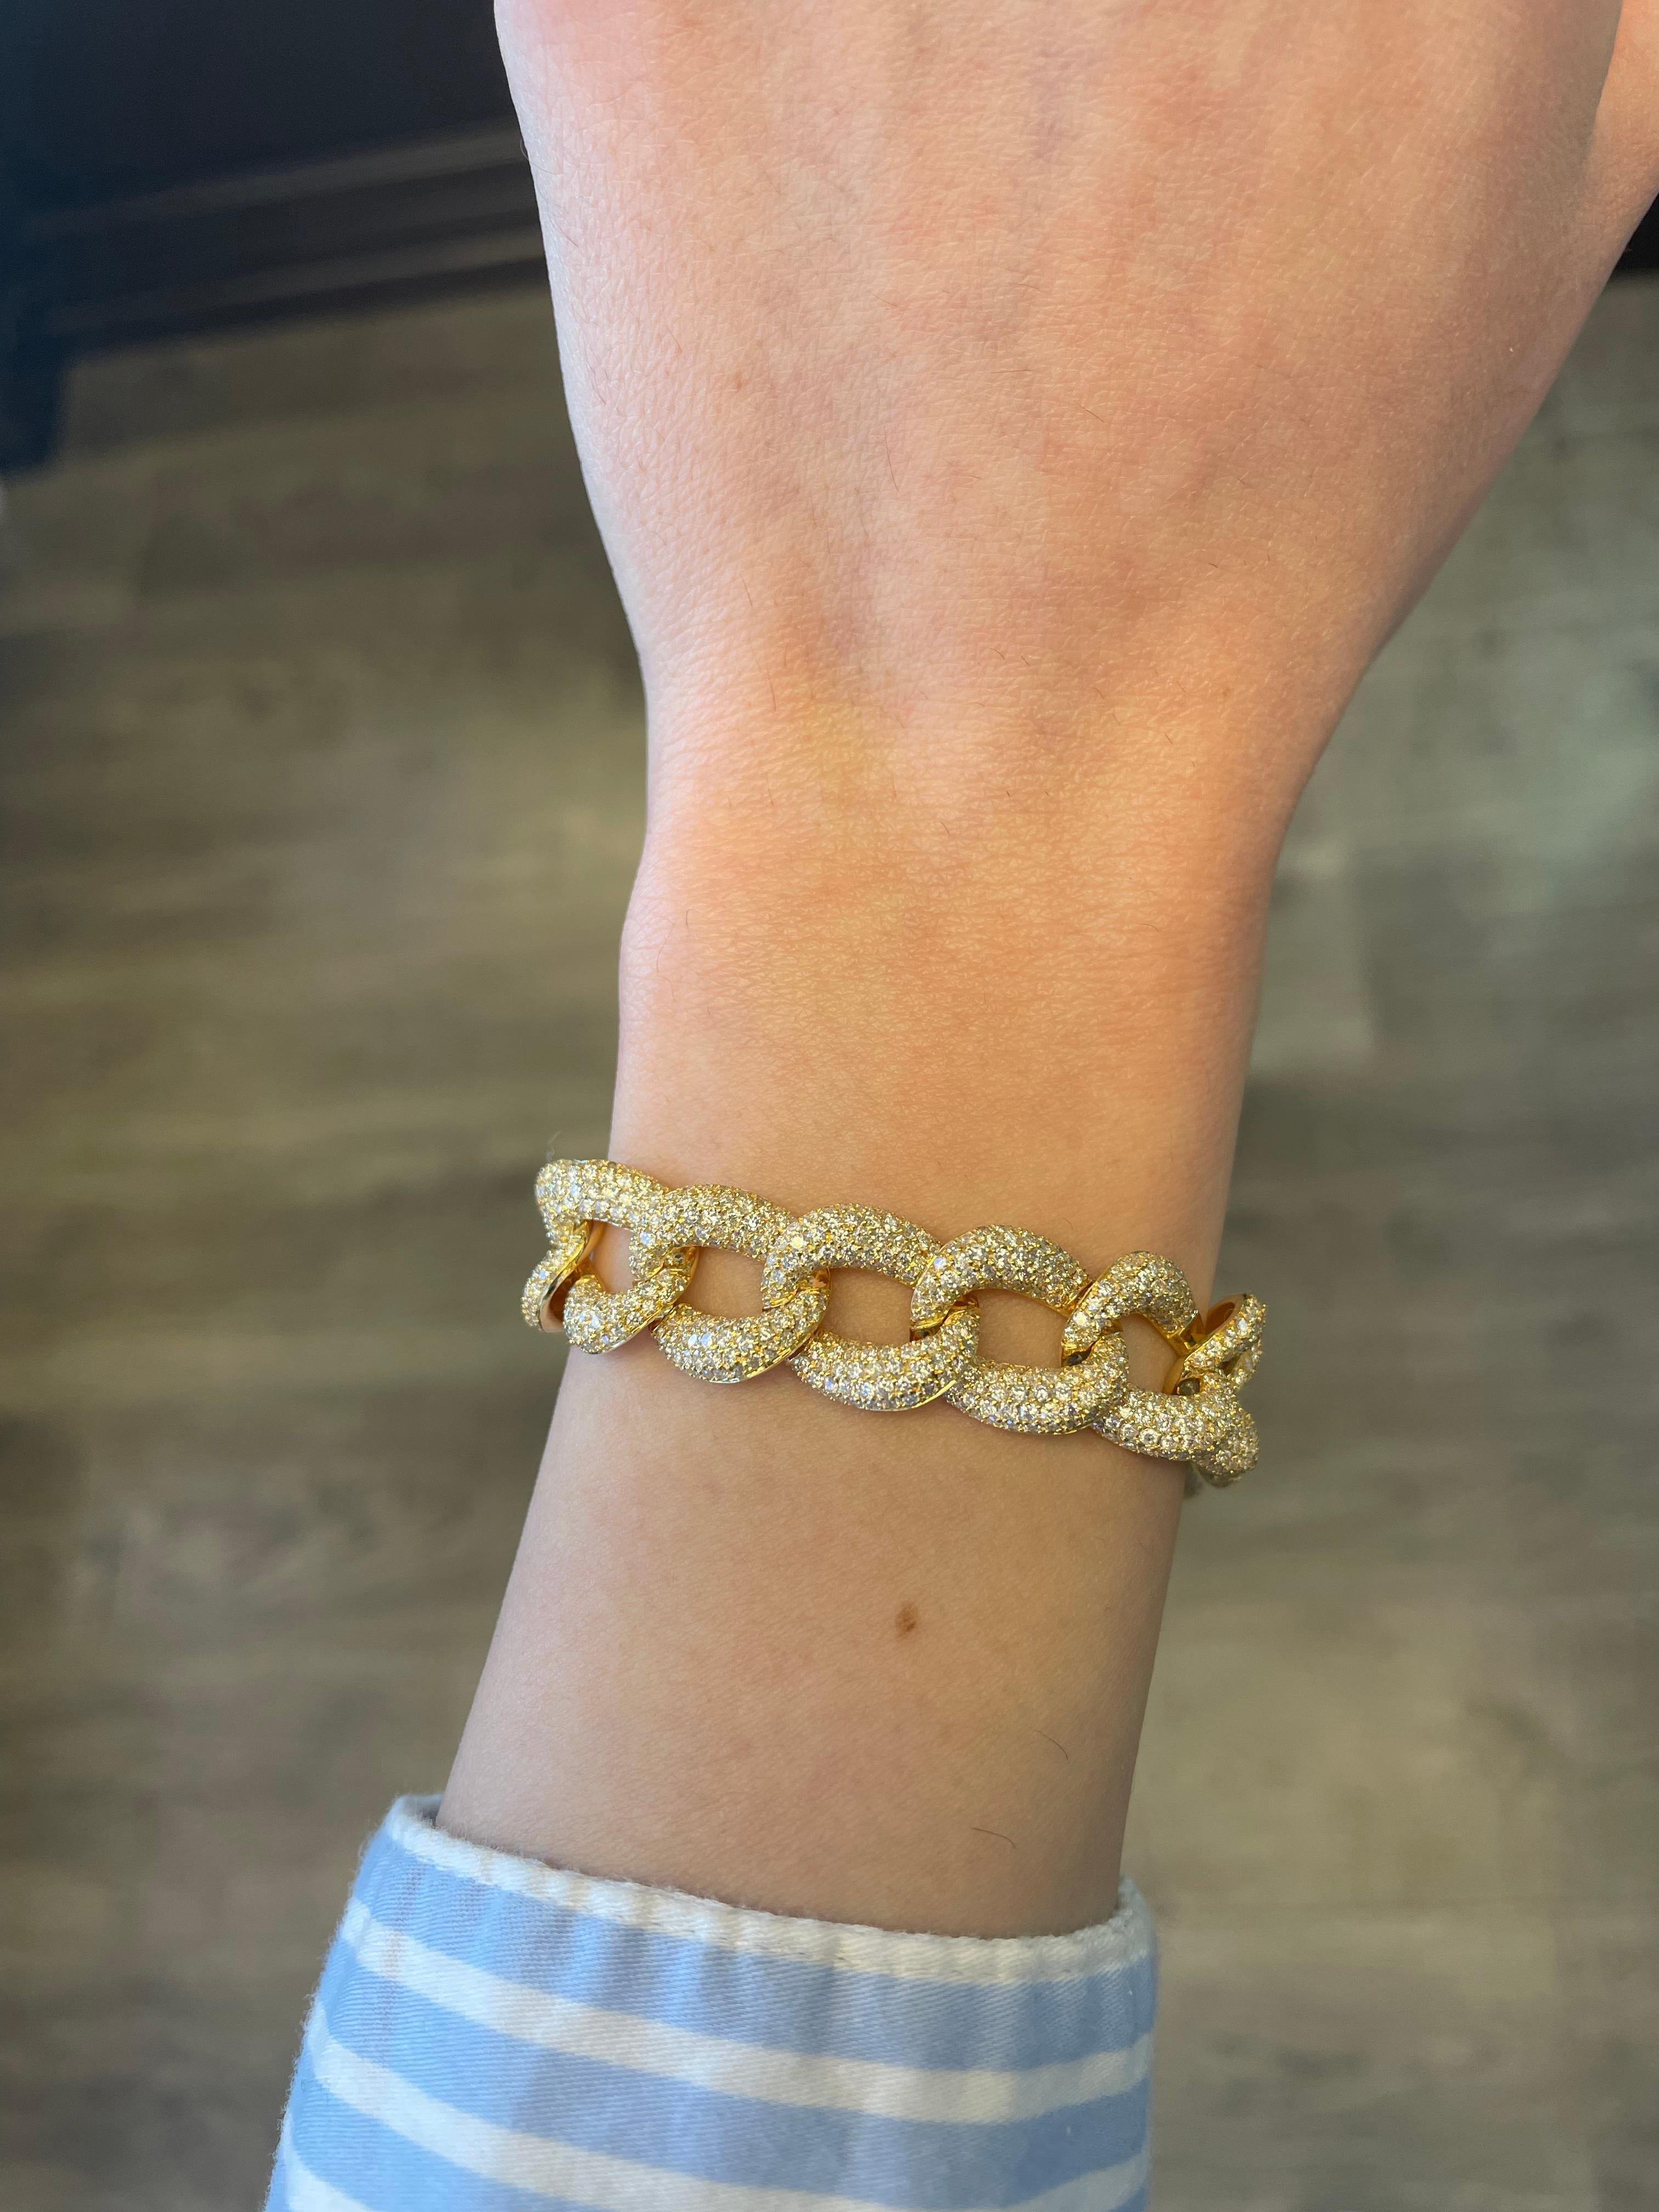 Modern diamond cuban link bracelet. High jewelry by Alexander Beverly Hills.
1648 round brilliant diamonds, 11.39carats total. Approximately G/H color and VS2/SI1 clarity. 18k yellow gold, 48.81 grams, and 14mm width.
Accommodated with an up-to-date